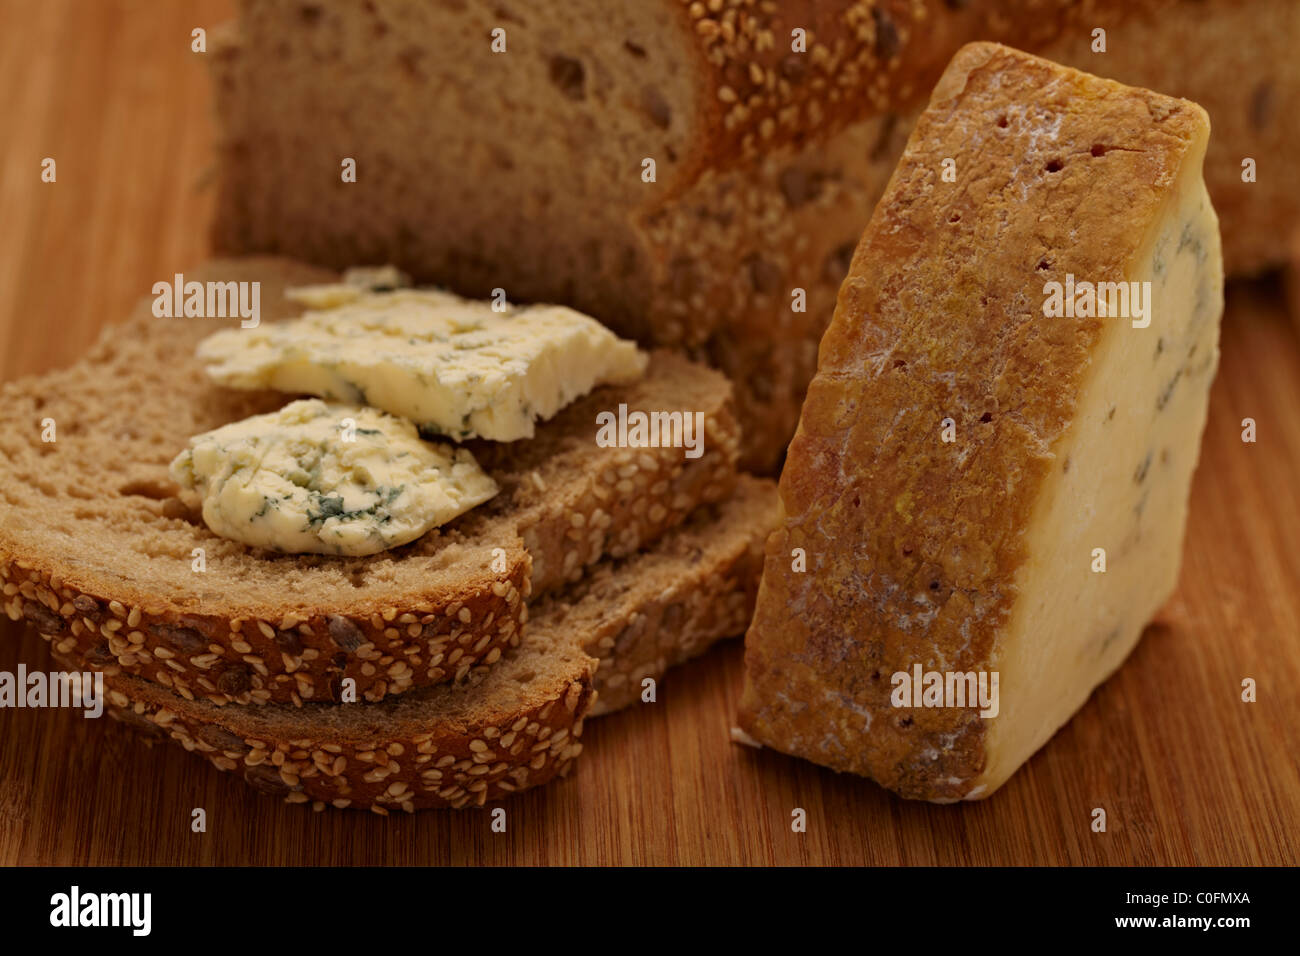 Freshly baked bread with stilton cheese on a bamboo chopping board Stock Photo